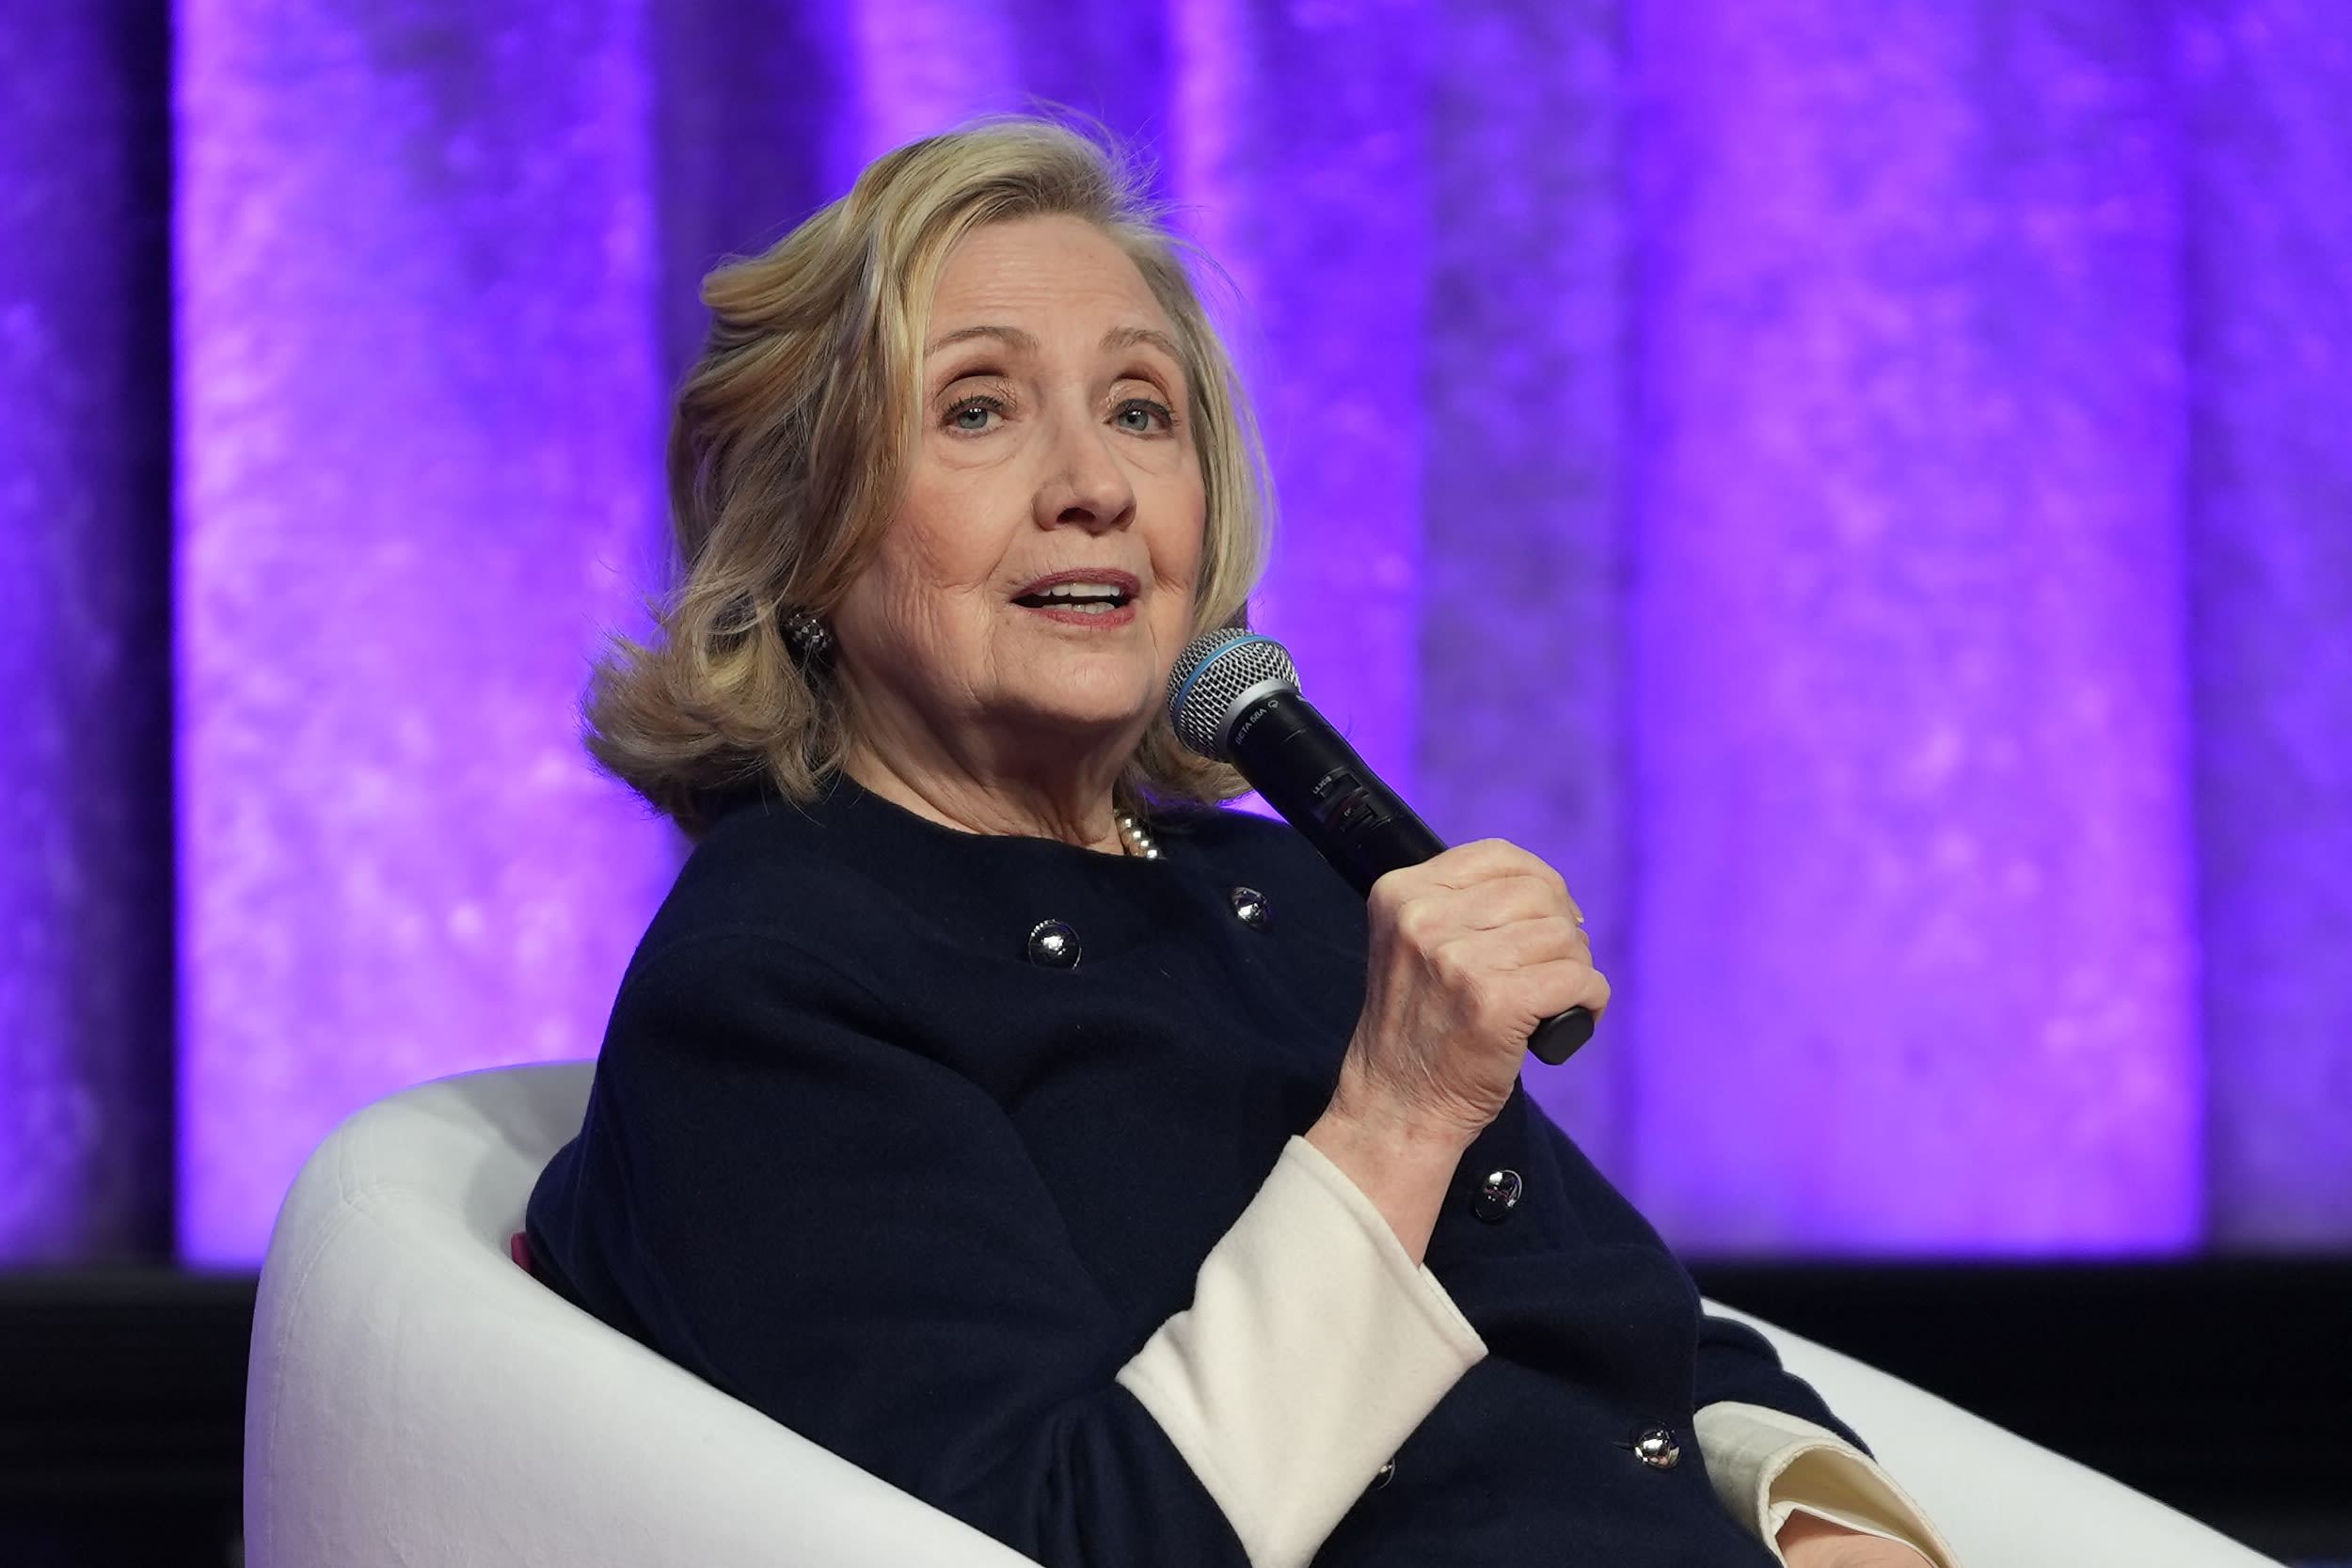 Hillary Clinton's comment on "weird" Republicans goes viral